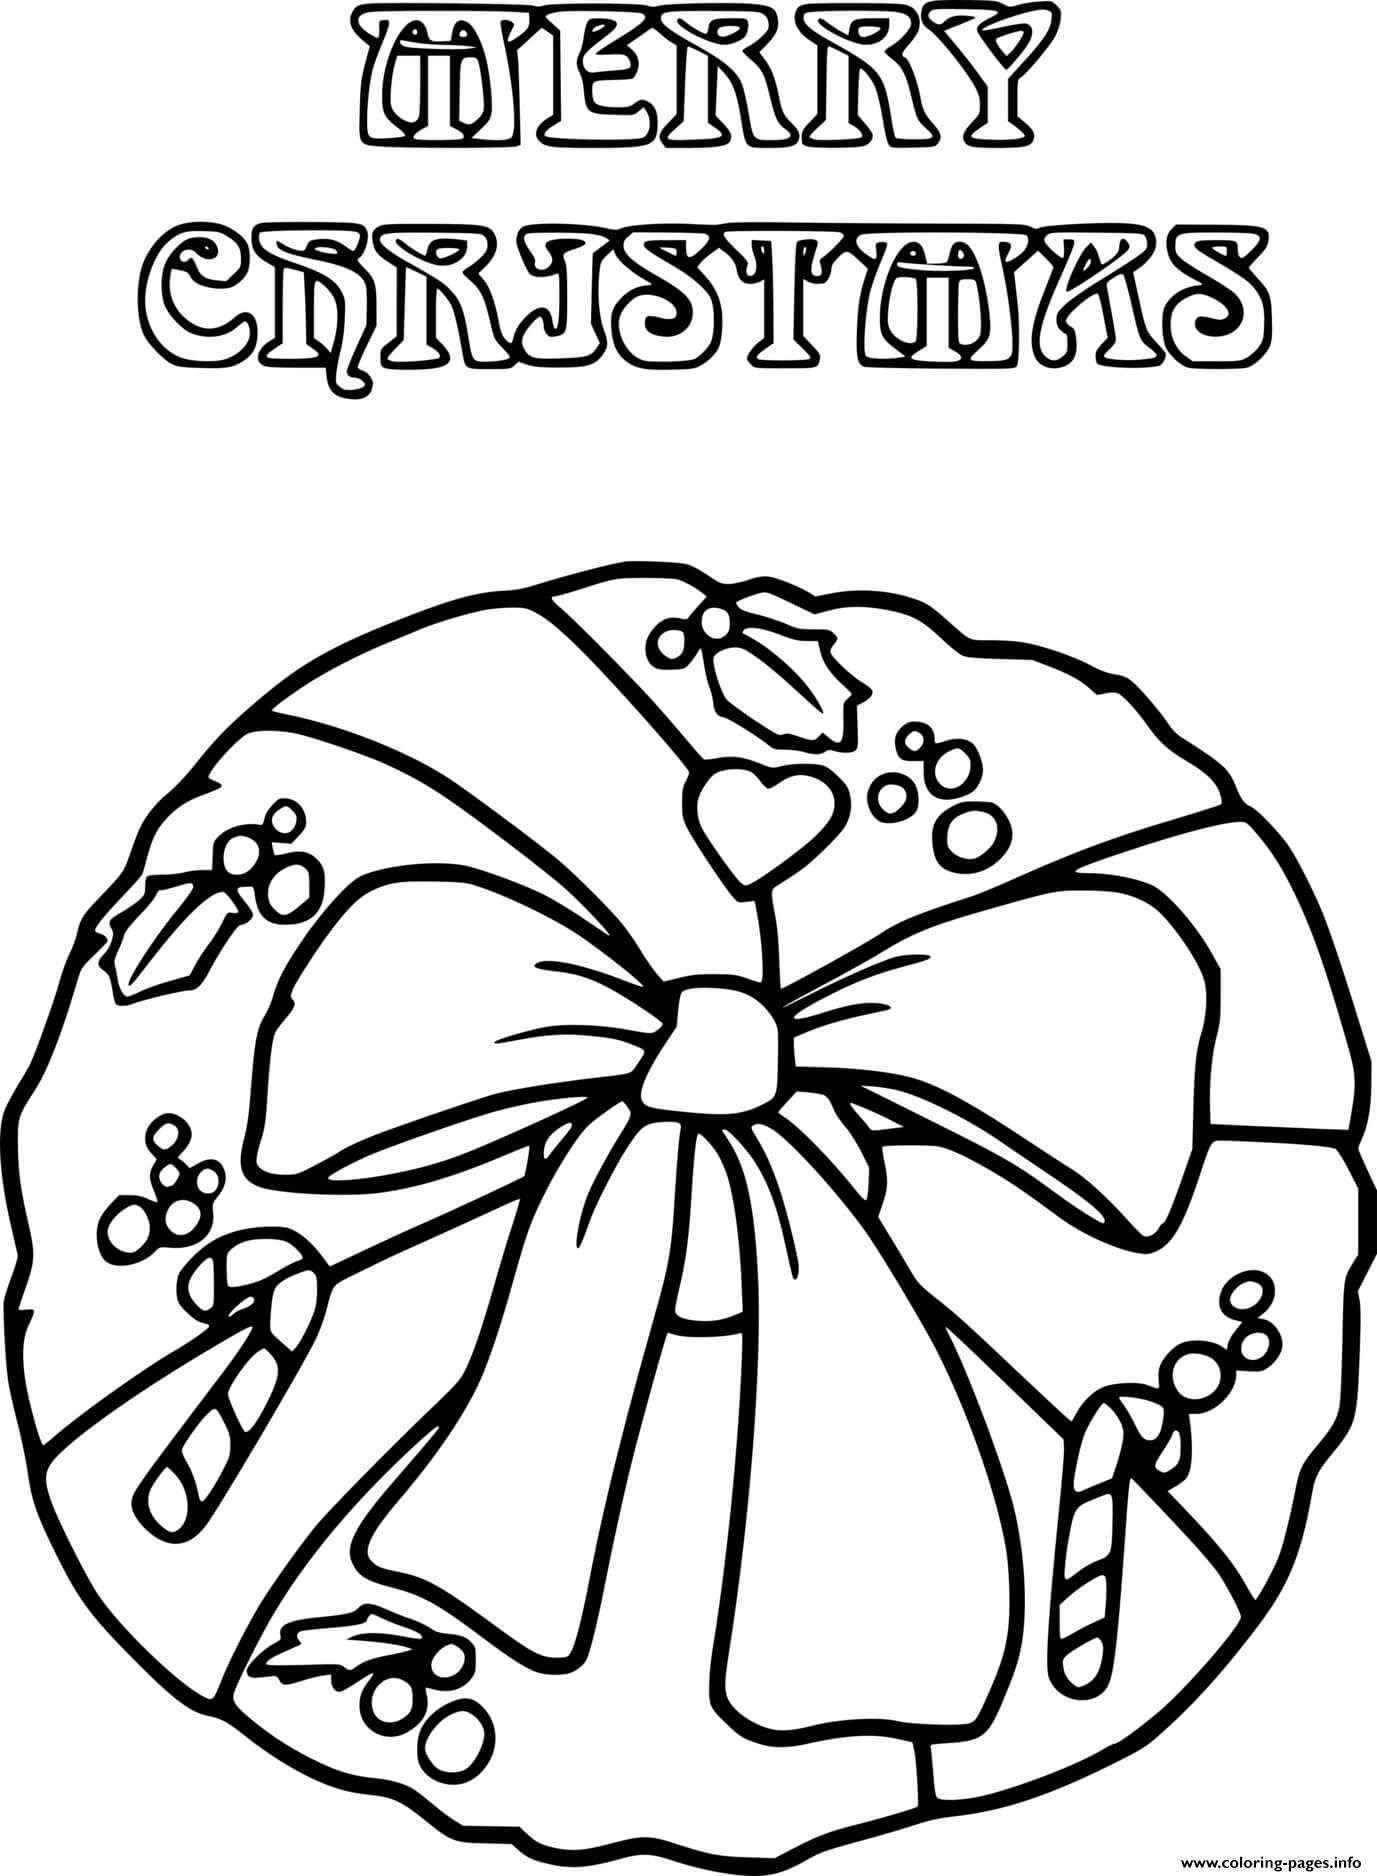 Merry Christmas With A Wreath coloring